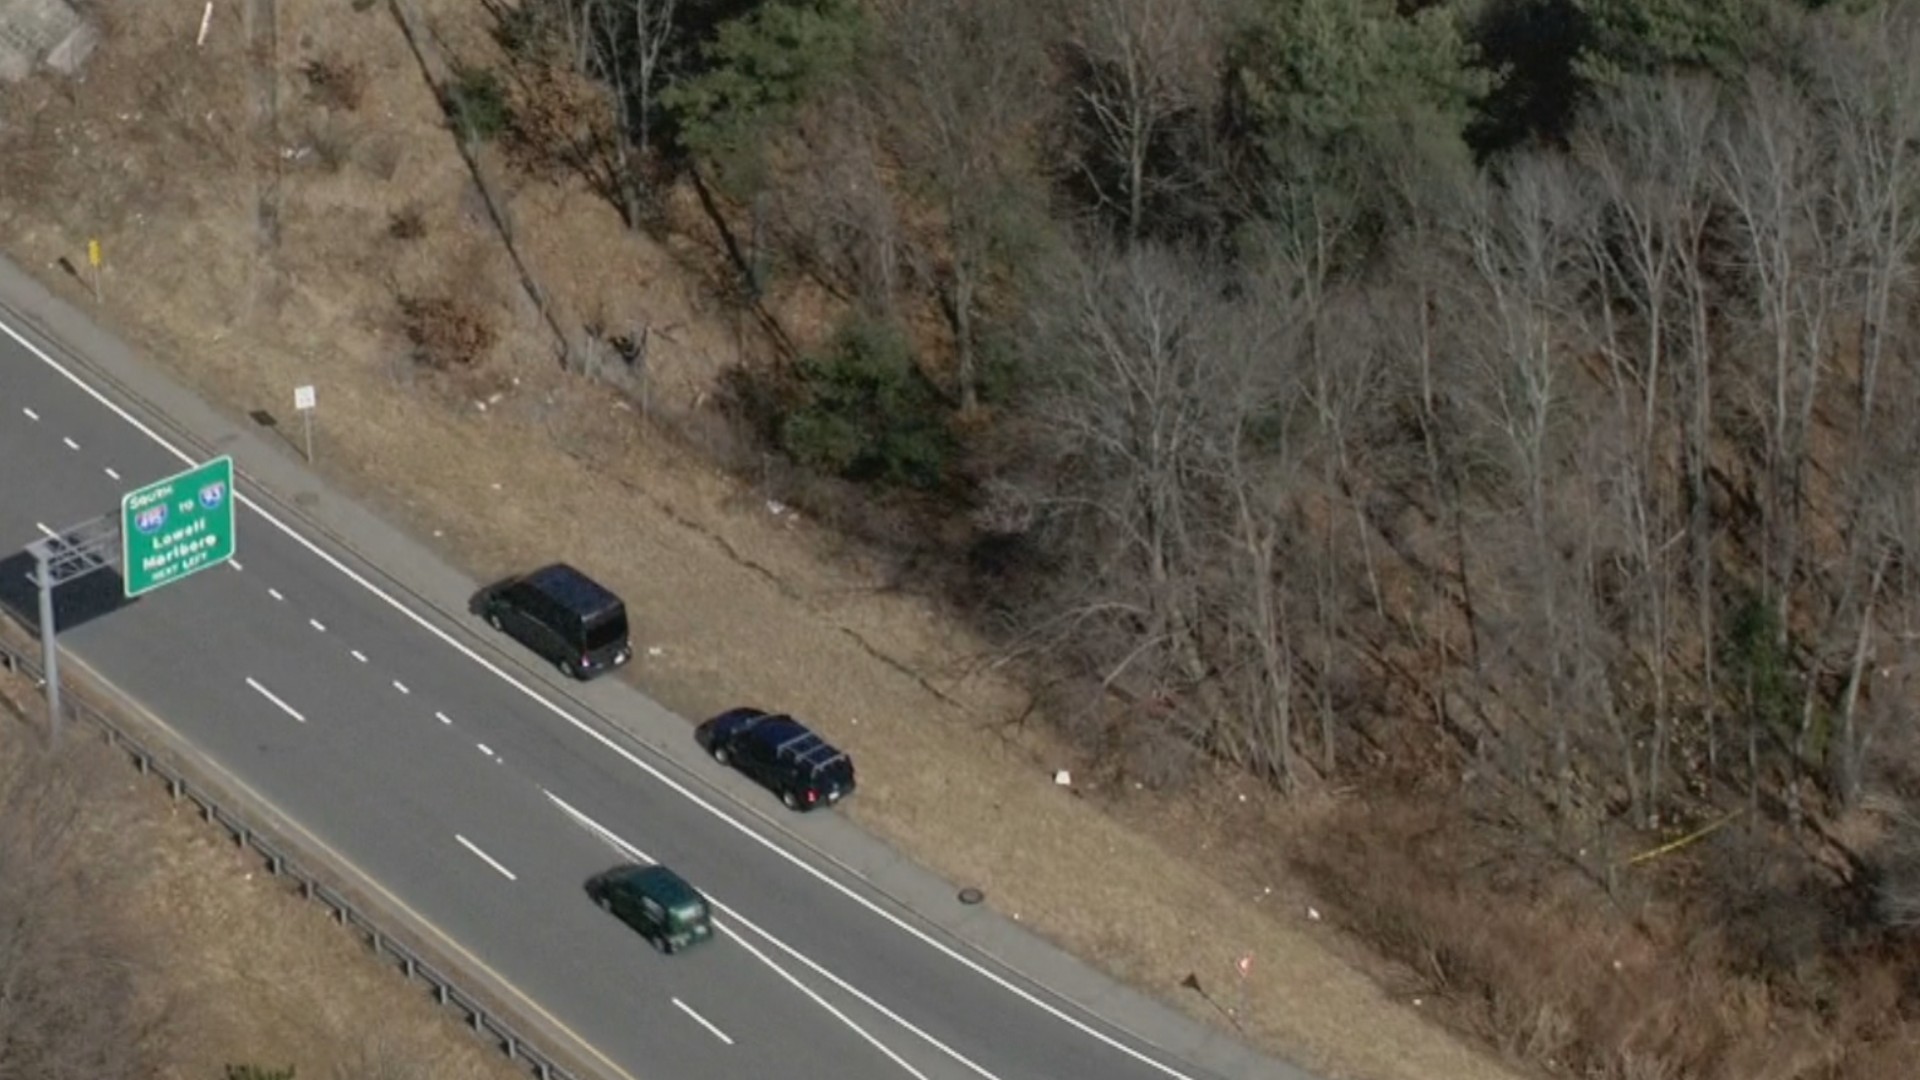 Human Skull, Jaw, Bone Found In Woods Off Routes 28 And 495 In Andover